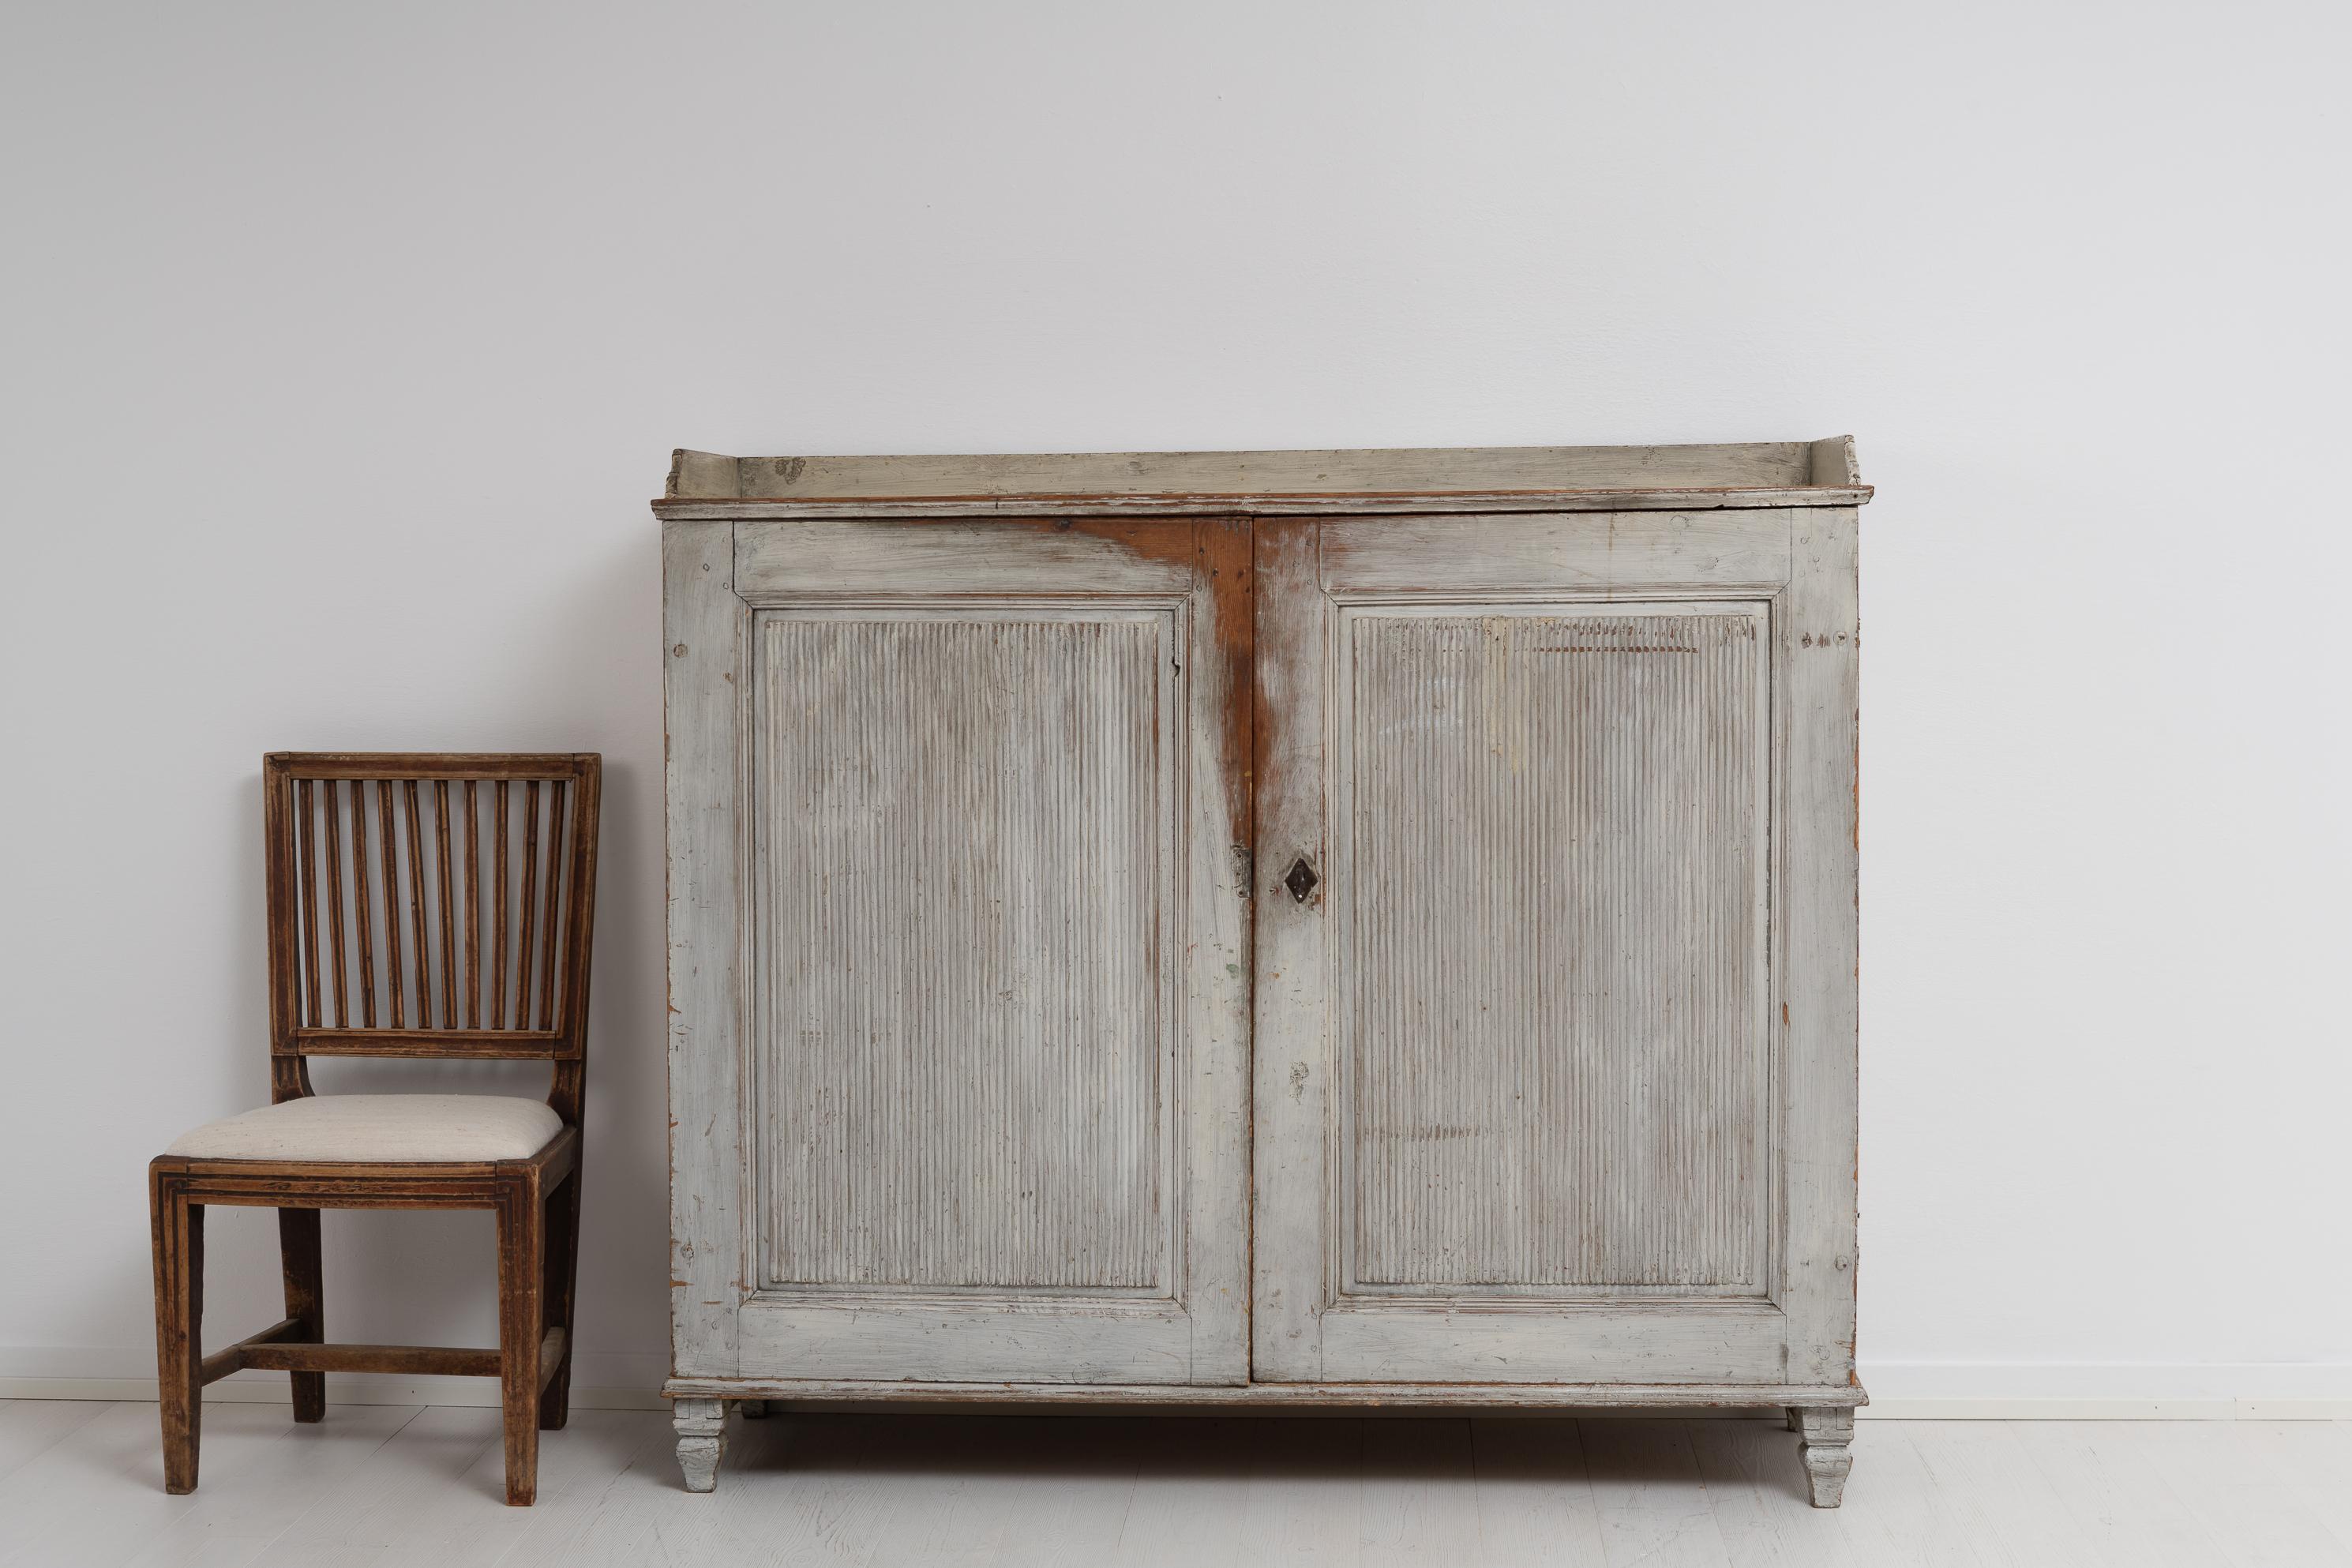 Light grey gustavian neoclassic sideboard from the late 1700s, 1790 to 1800, from Northern Sweden. The sideboard is in the classic model with typical decor and straight shape. The Swedish gustavian period is contemporary to the neoclassic period.